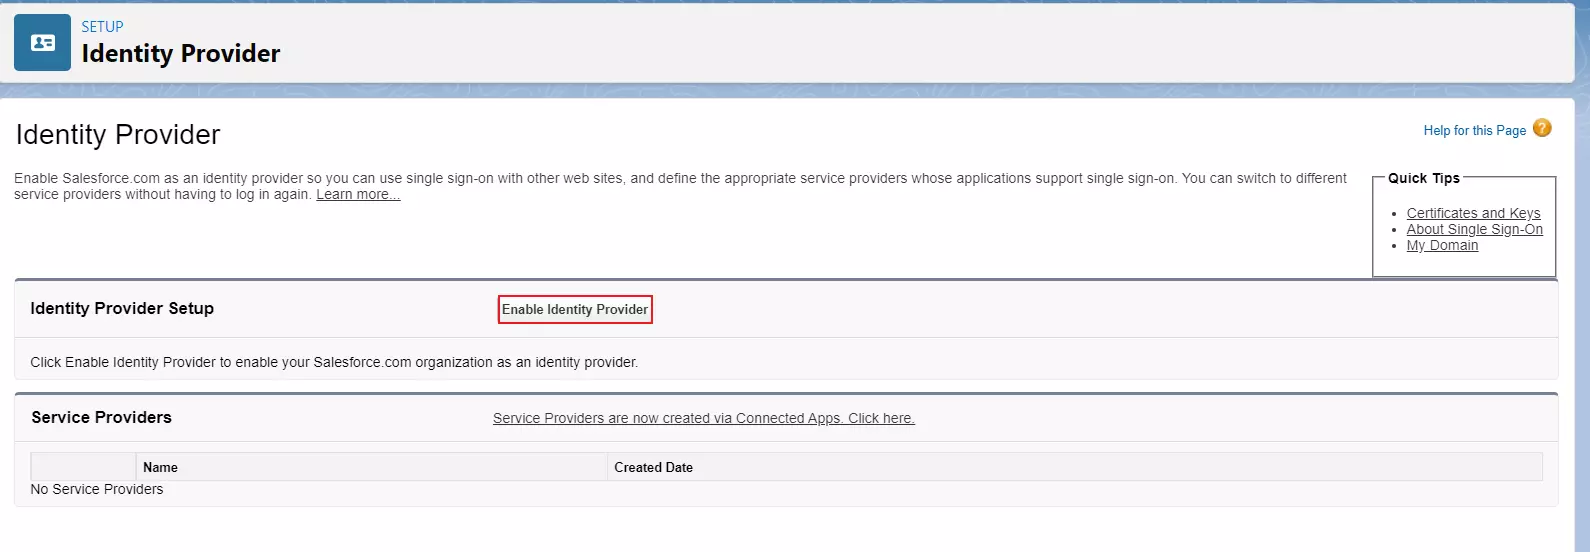 Salesforce IdP : Enable IDP option to see Salesforce SAML endpoints